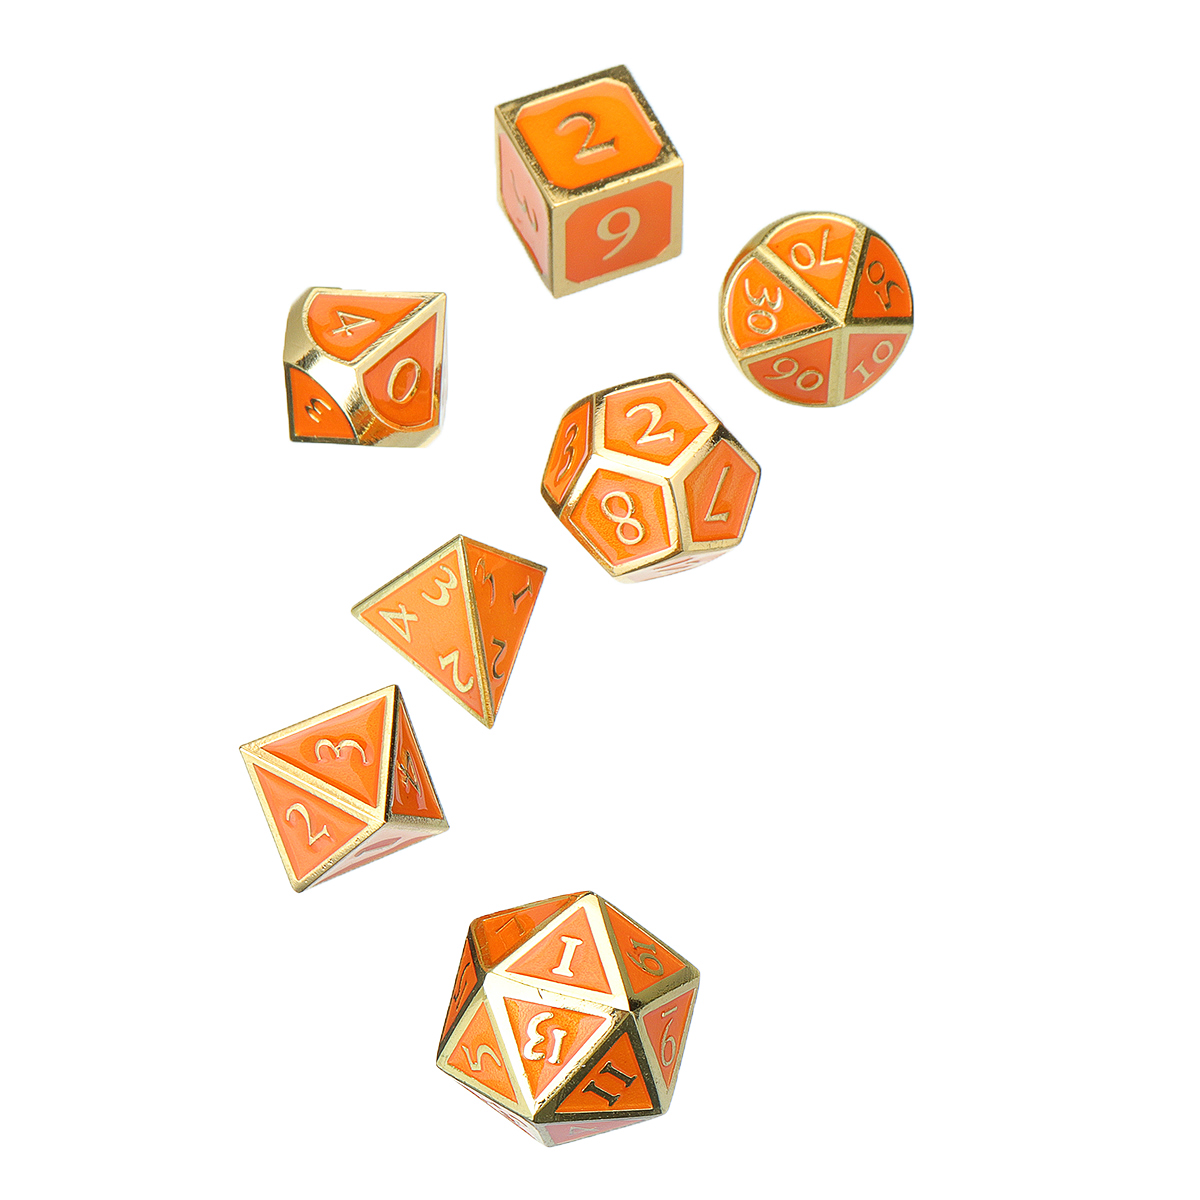 Solid-Metal-Heavy-Dice-Set-Polyhedral-Dices-Role-Playing-Games-Dice-Gadget-RPG-1391317-6